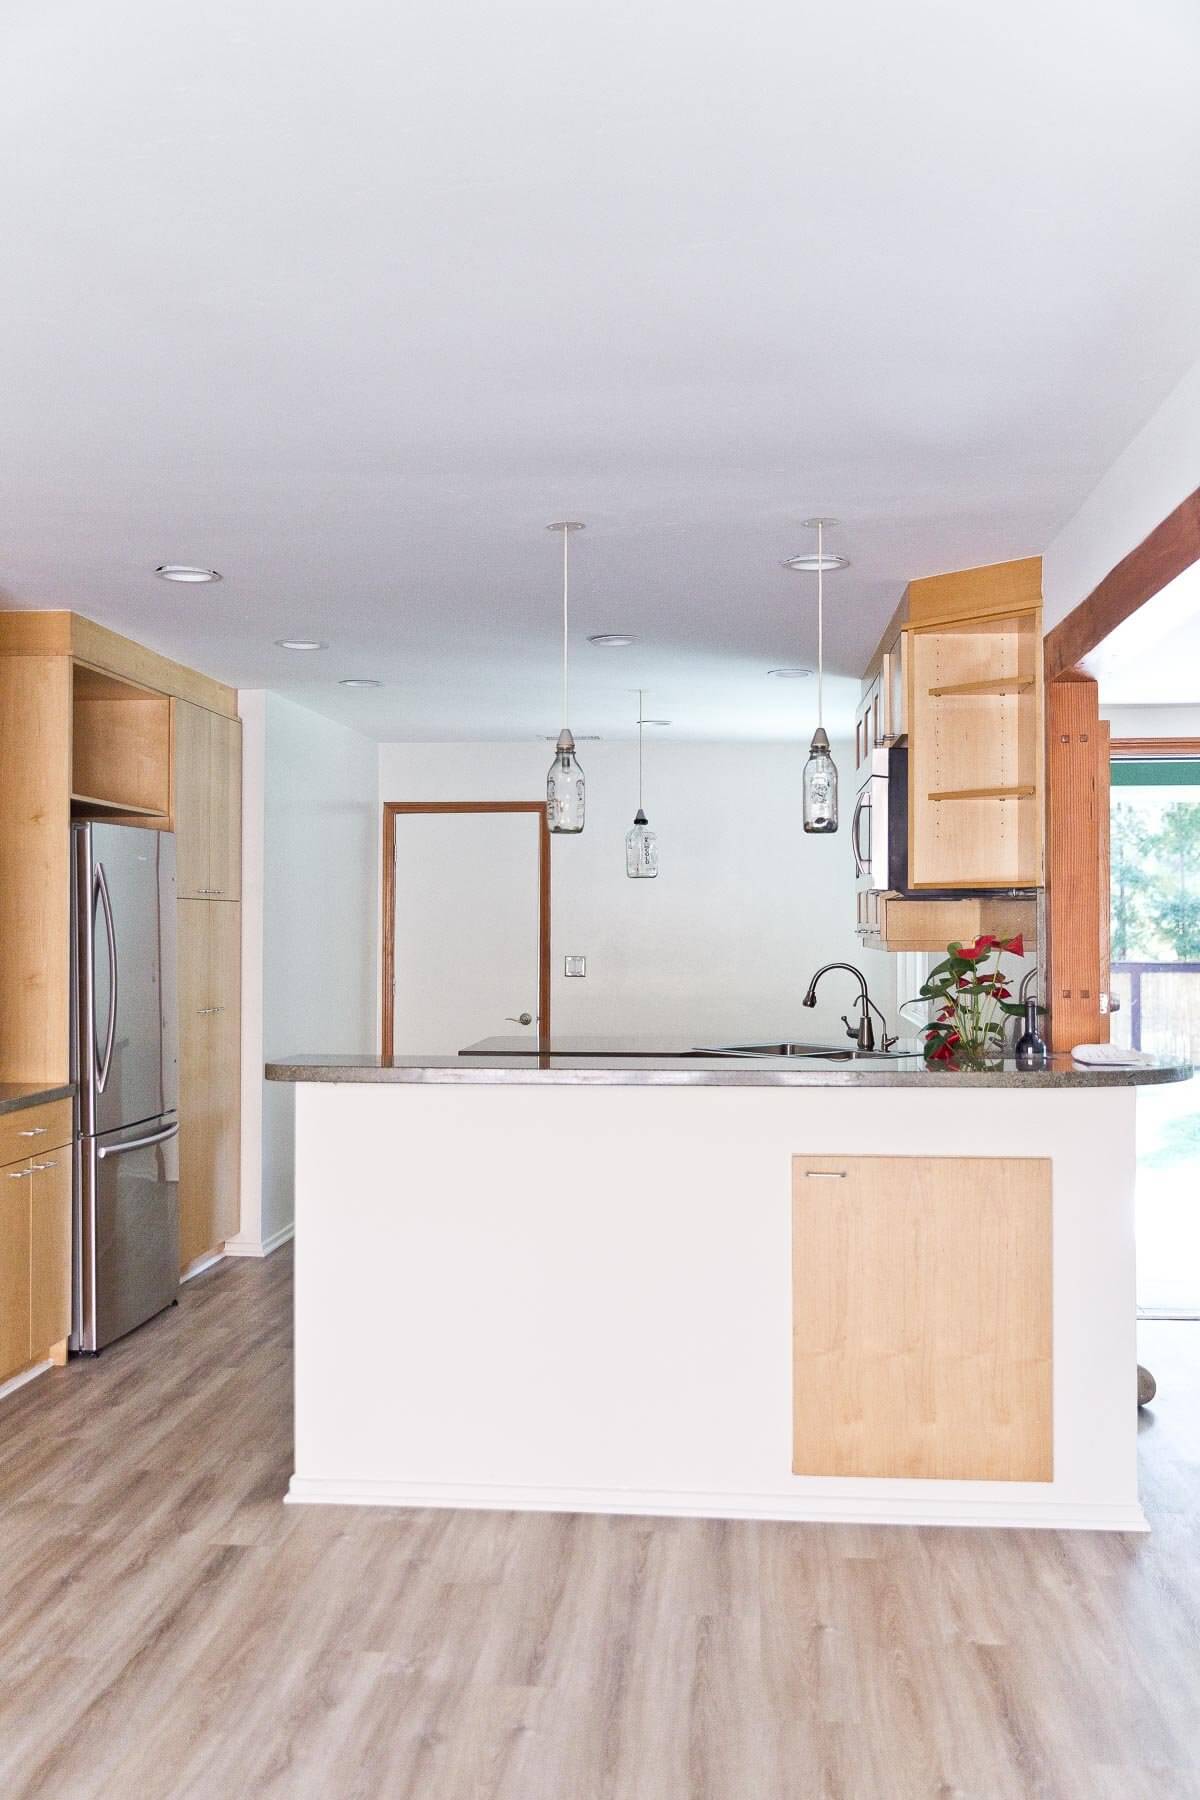 1- Start by taking an inventory of kitchen cabinets